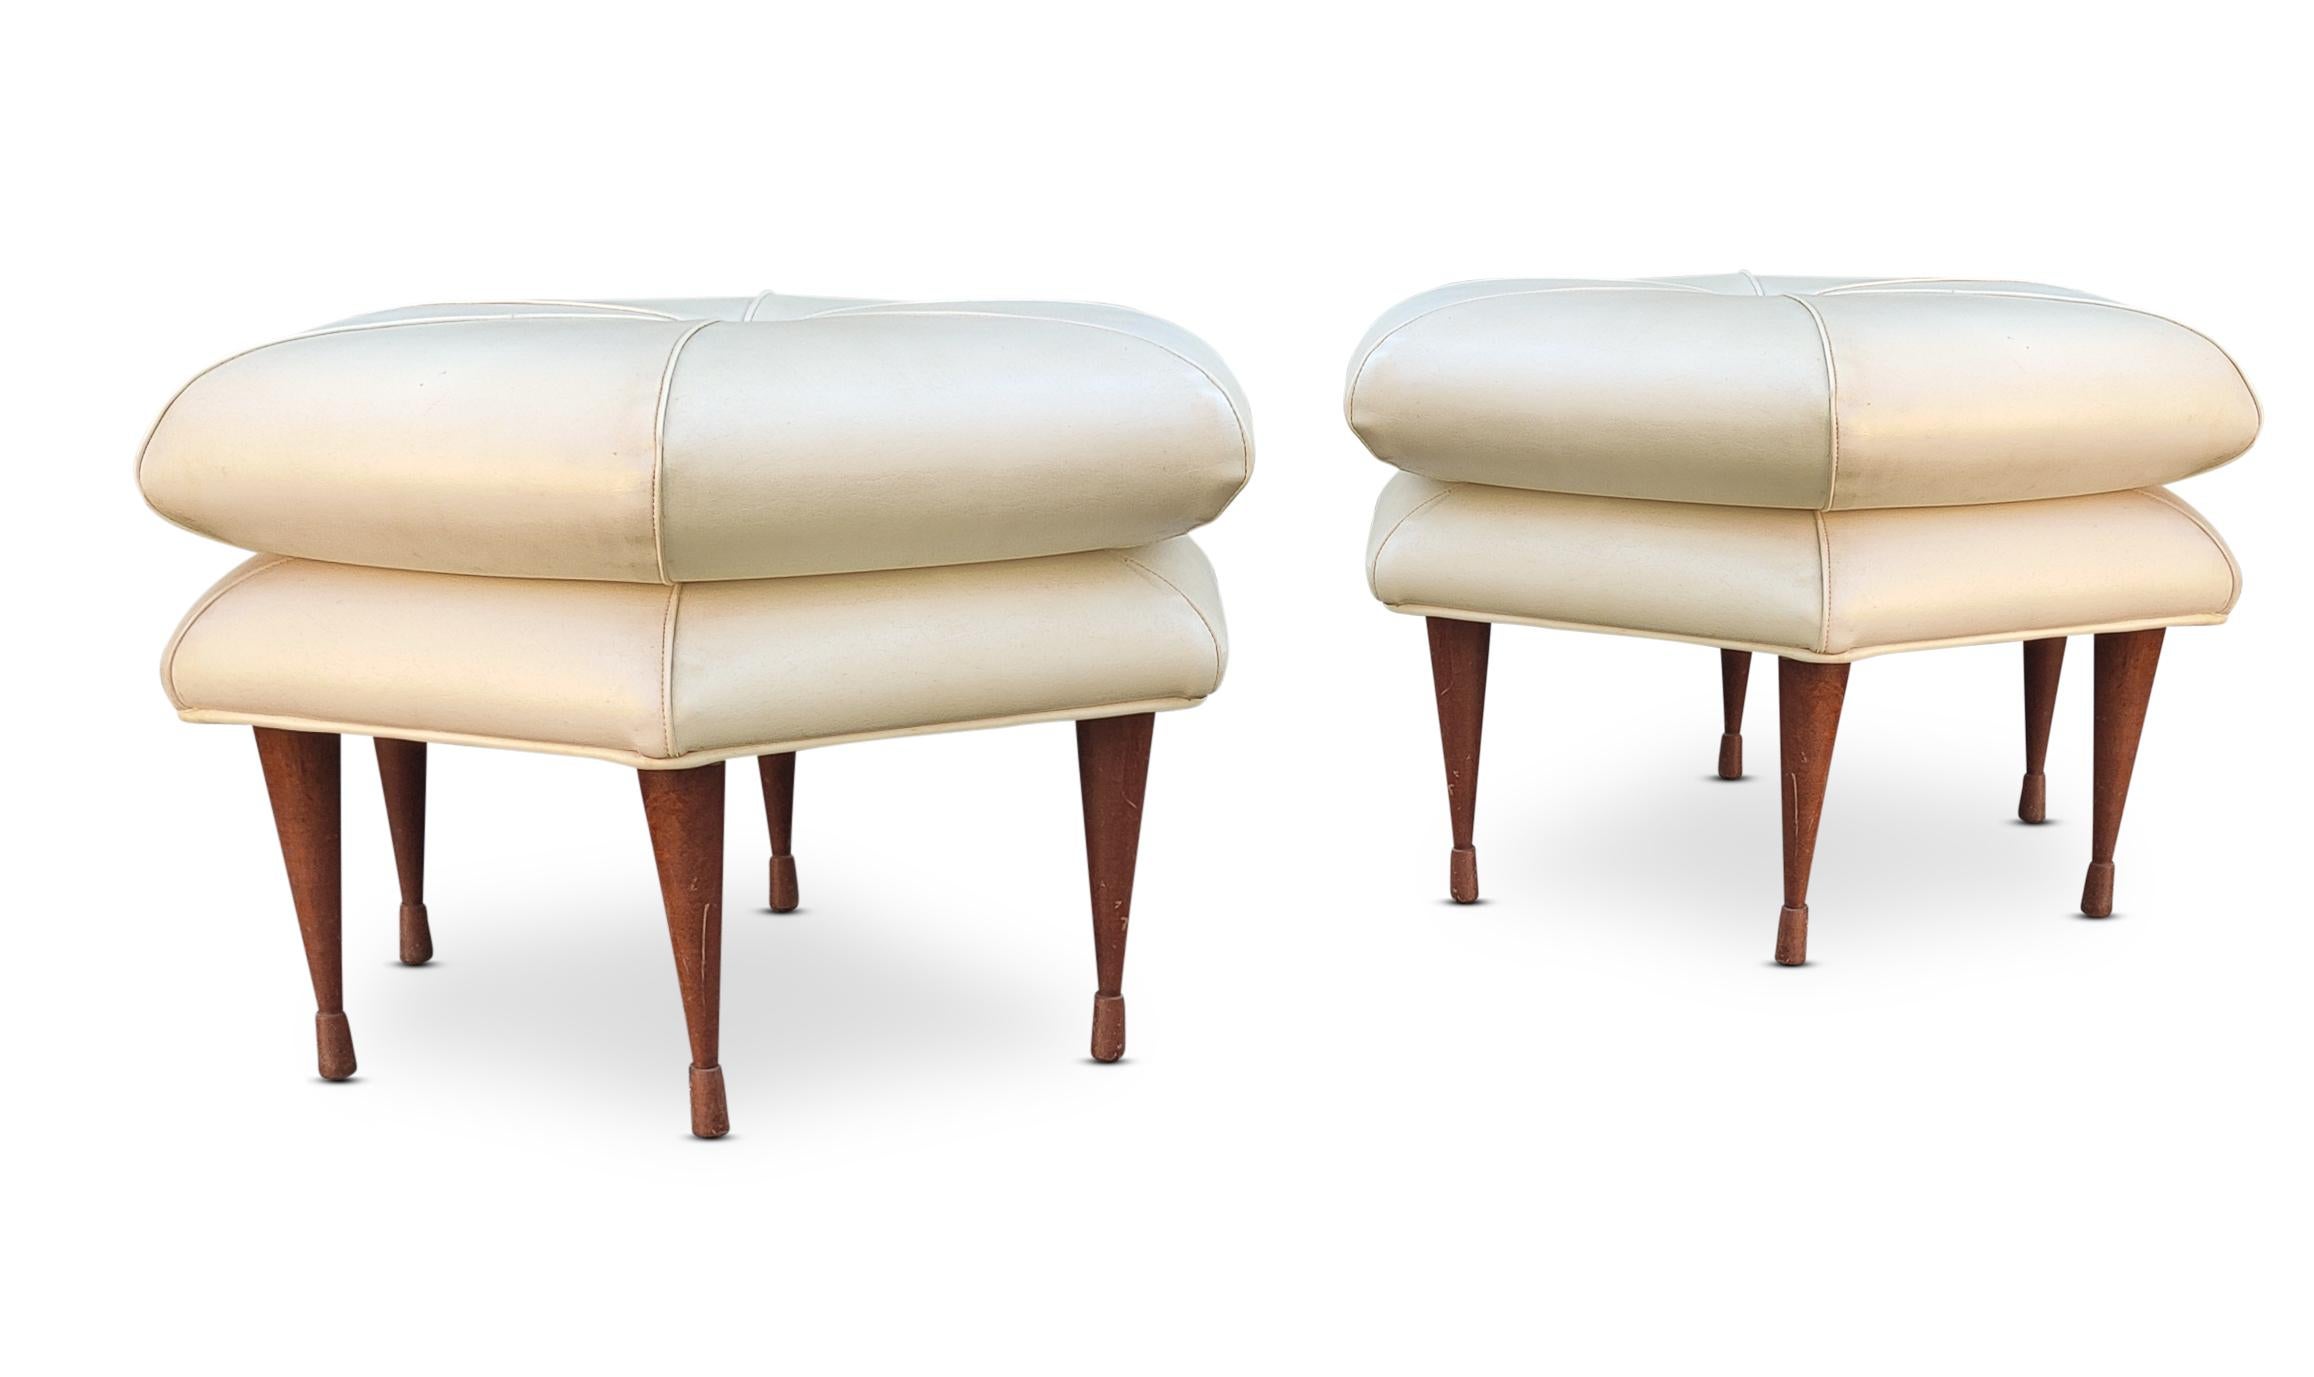 Pair of Selig Hexagon Form Ottoman or Pouffe Original Leatherette on Walnut Legs In Good Condition For Sale In Philadelphia, PA